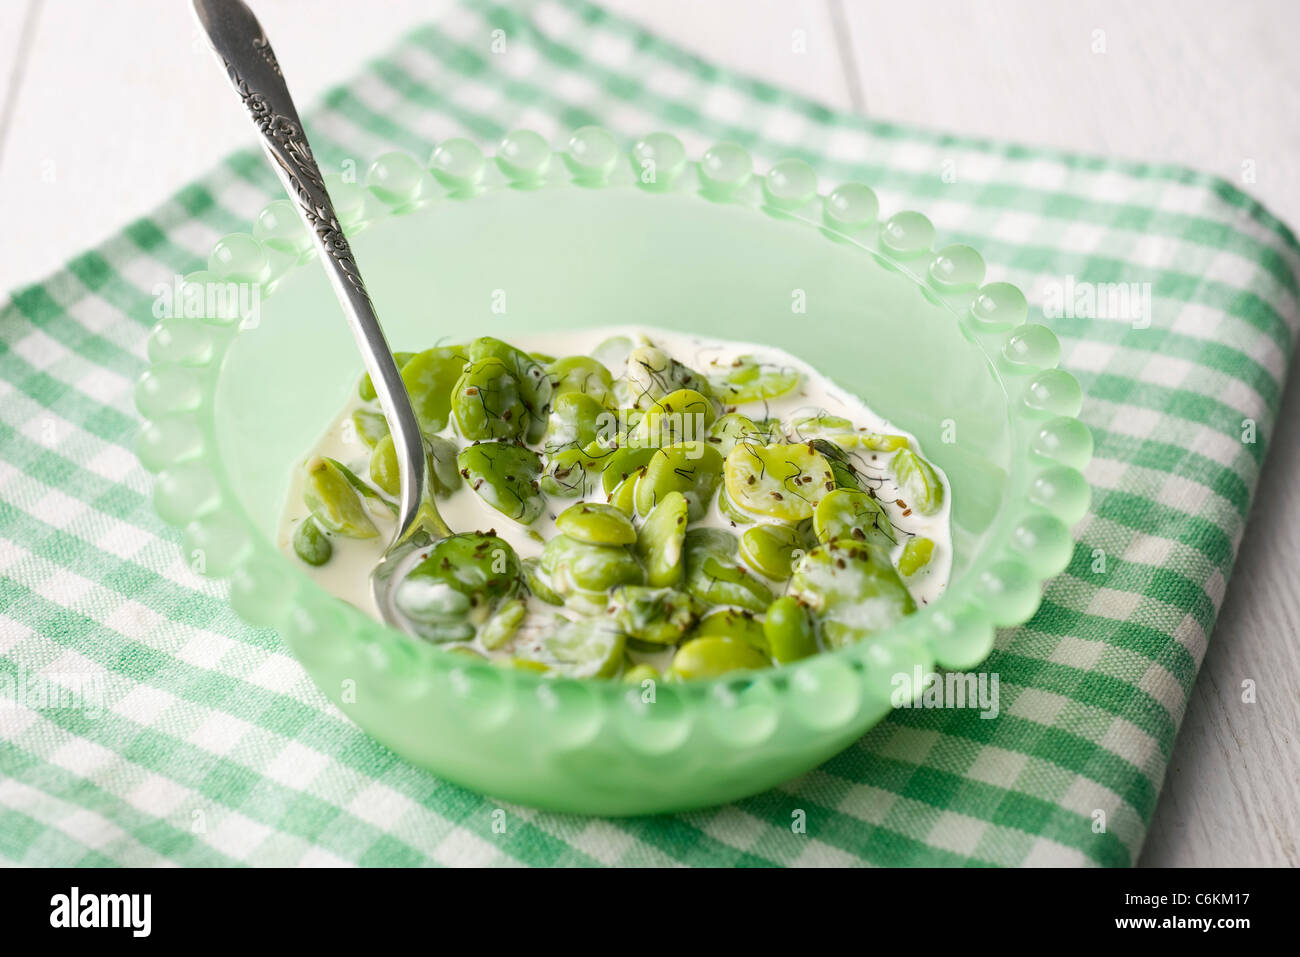 Broad beans with poppy seeds Stock Photo